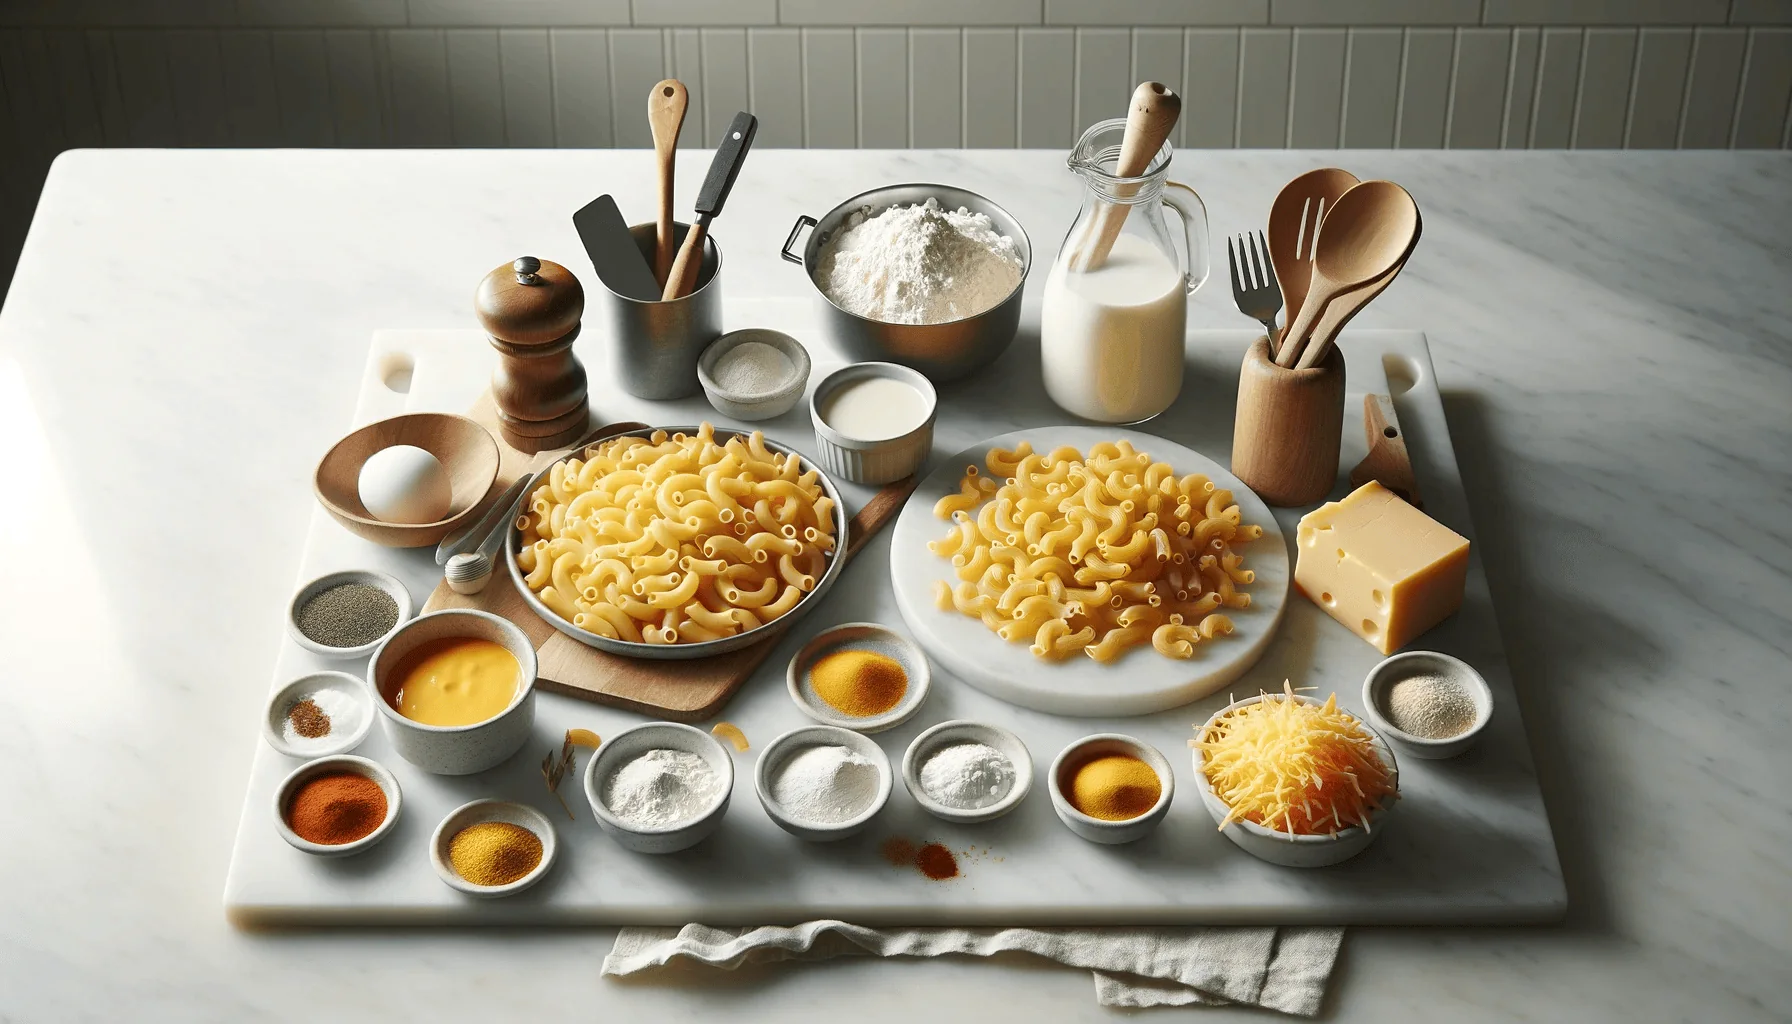 Ingredients for mac and cheese arranged on a marble countertop with wooden utensils